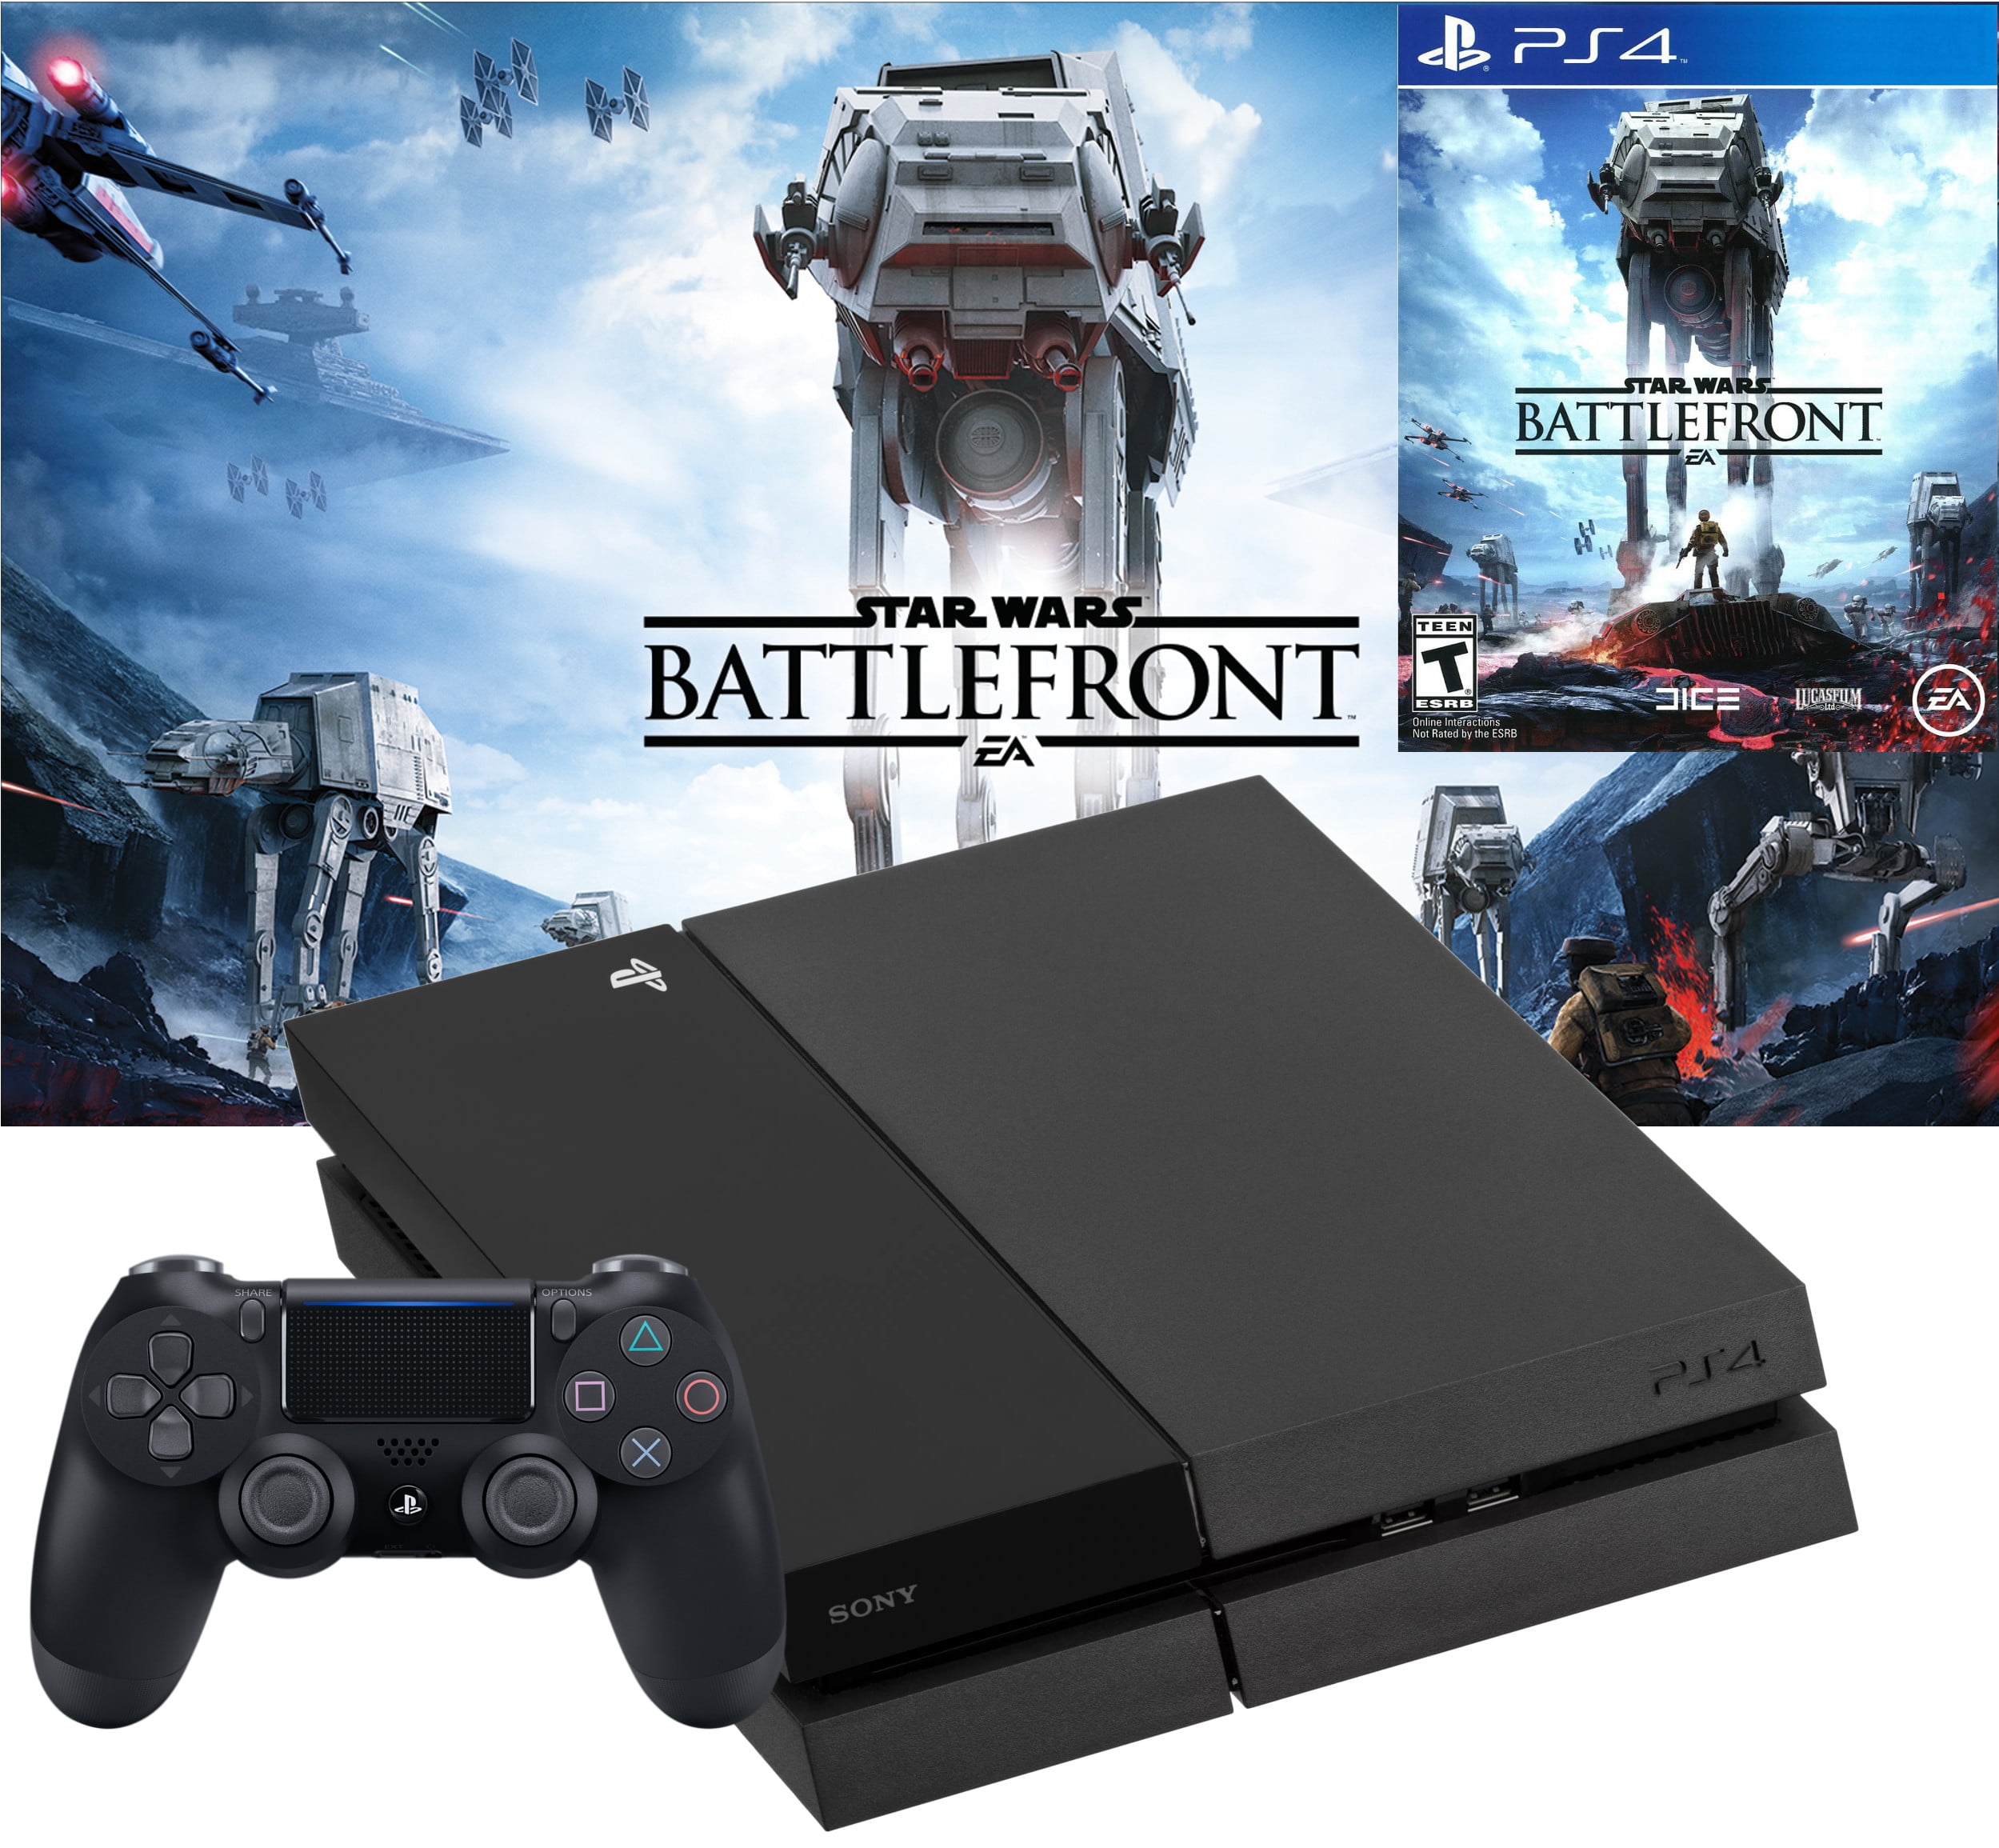 Refurbished PlayStation 4 PS4 500GB Console with Star Wars Battlefront Bundle